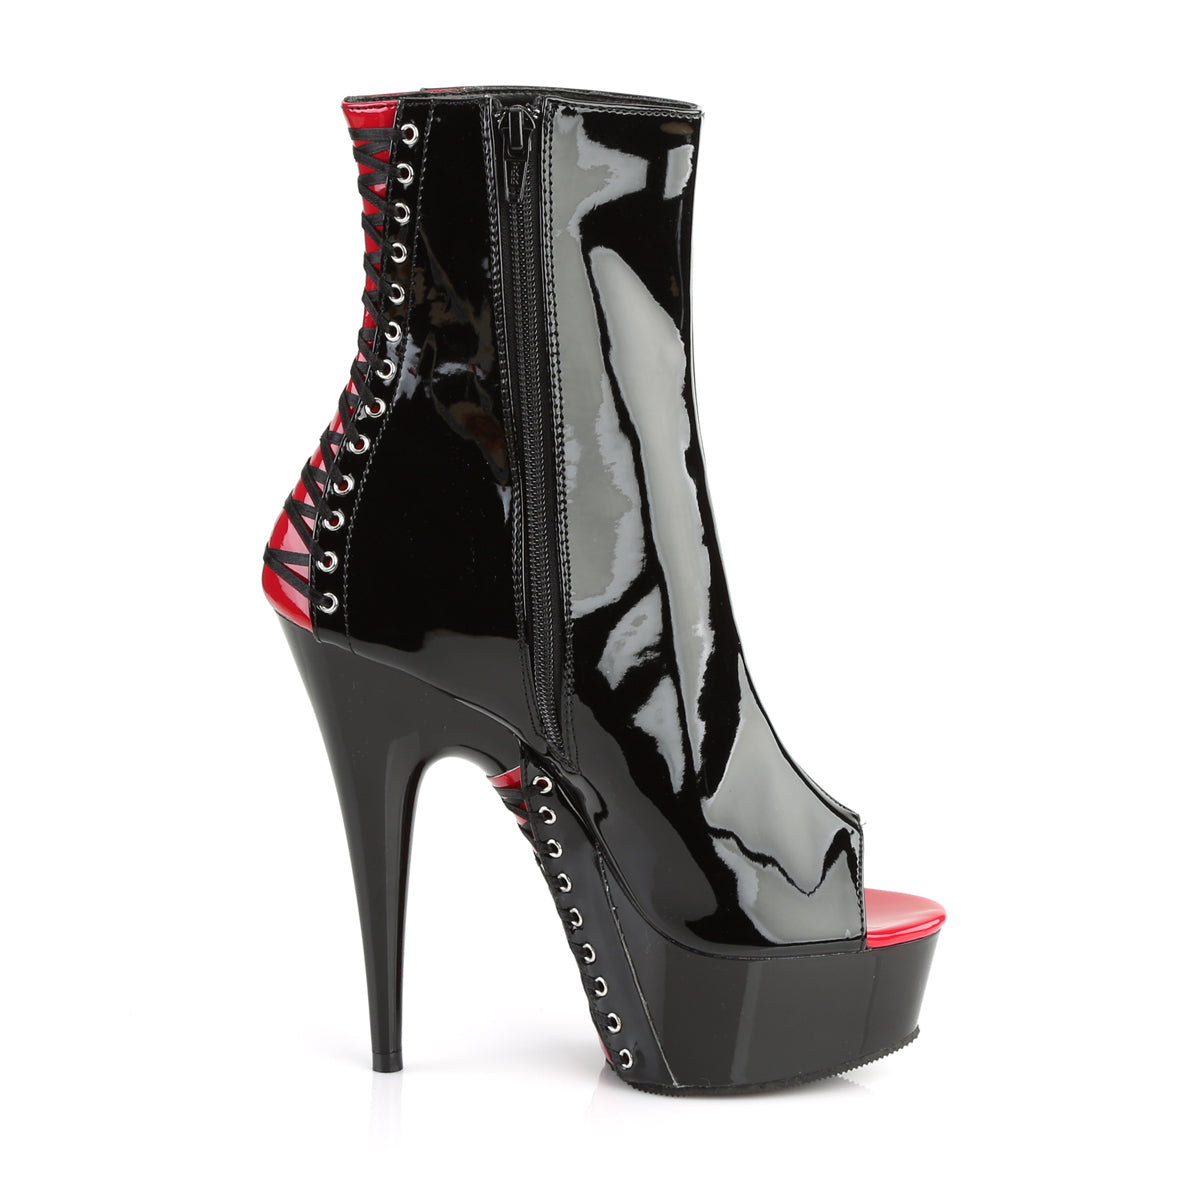 DELIGHT-1025 6" Heel Black and Red Pole Dancing Platforms-Pleaser- Sexy Shoes Fetish Heels